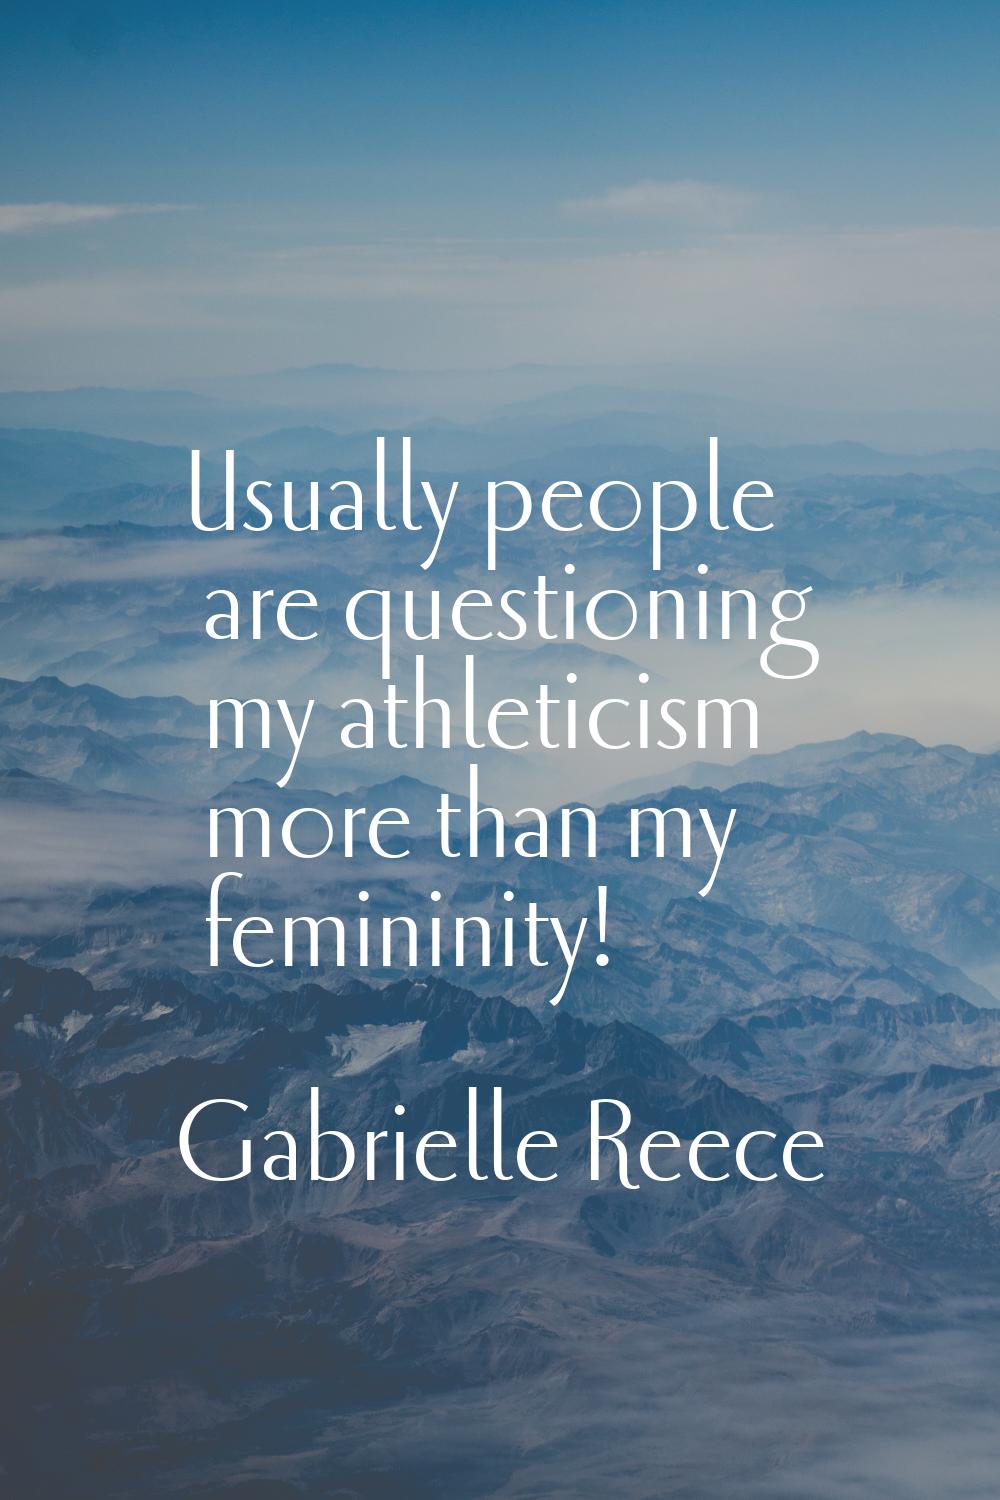 Usually people are questioning my athleticism more than my femininity!